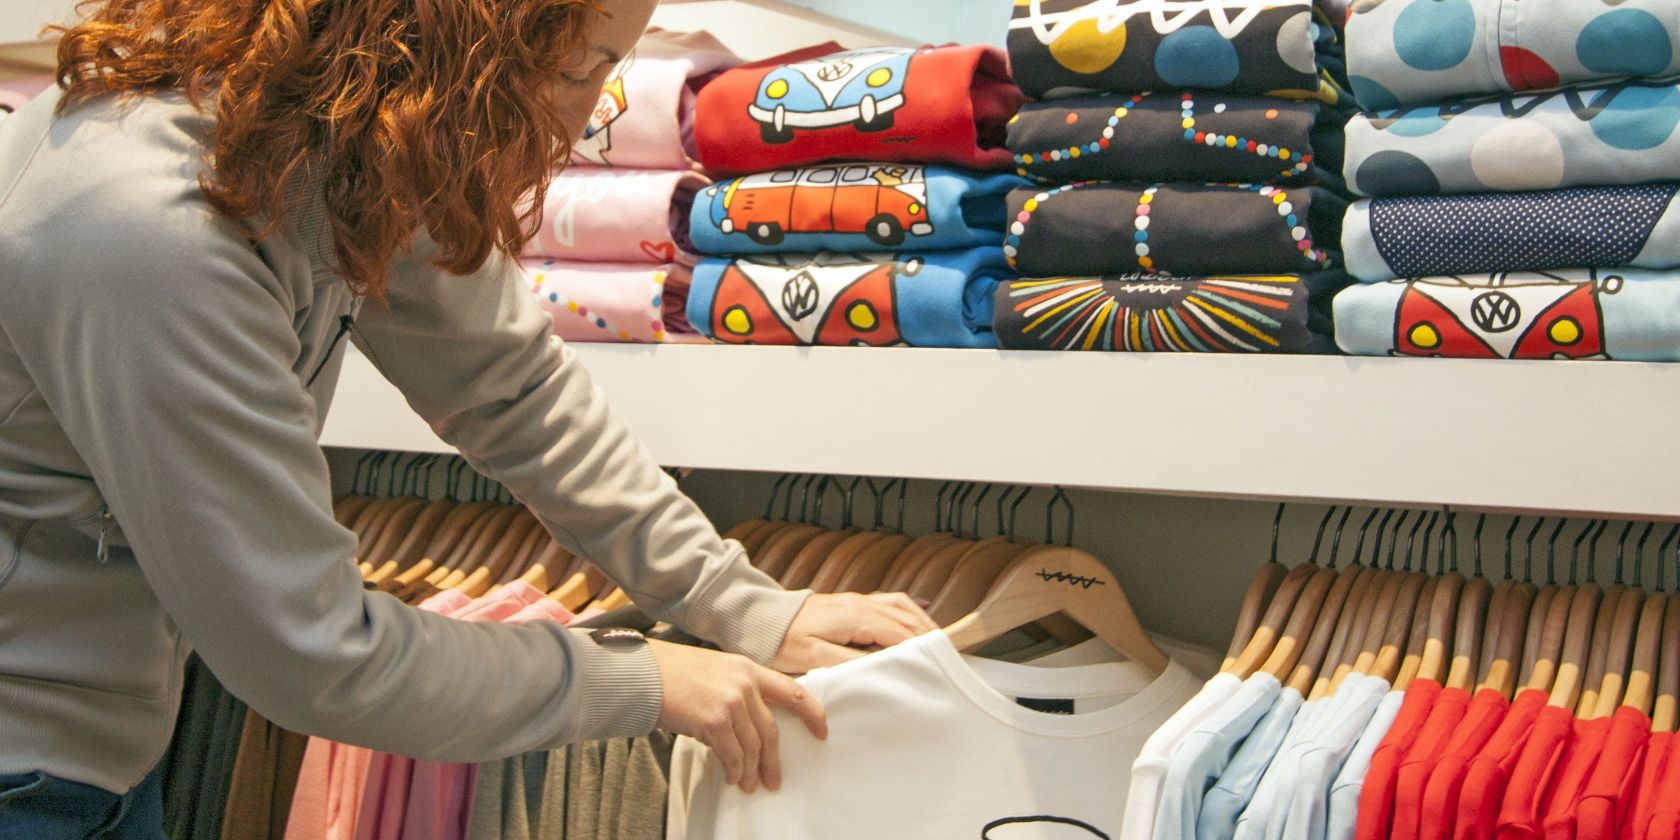 A Woman Choosing and Buying T-Shirts at a Store